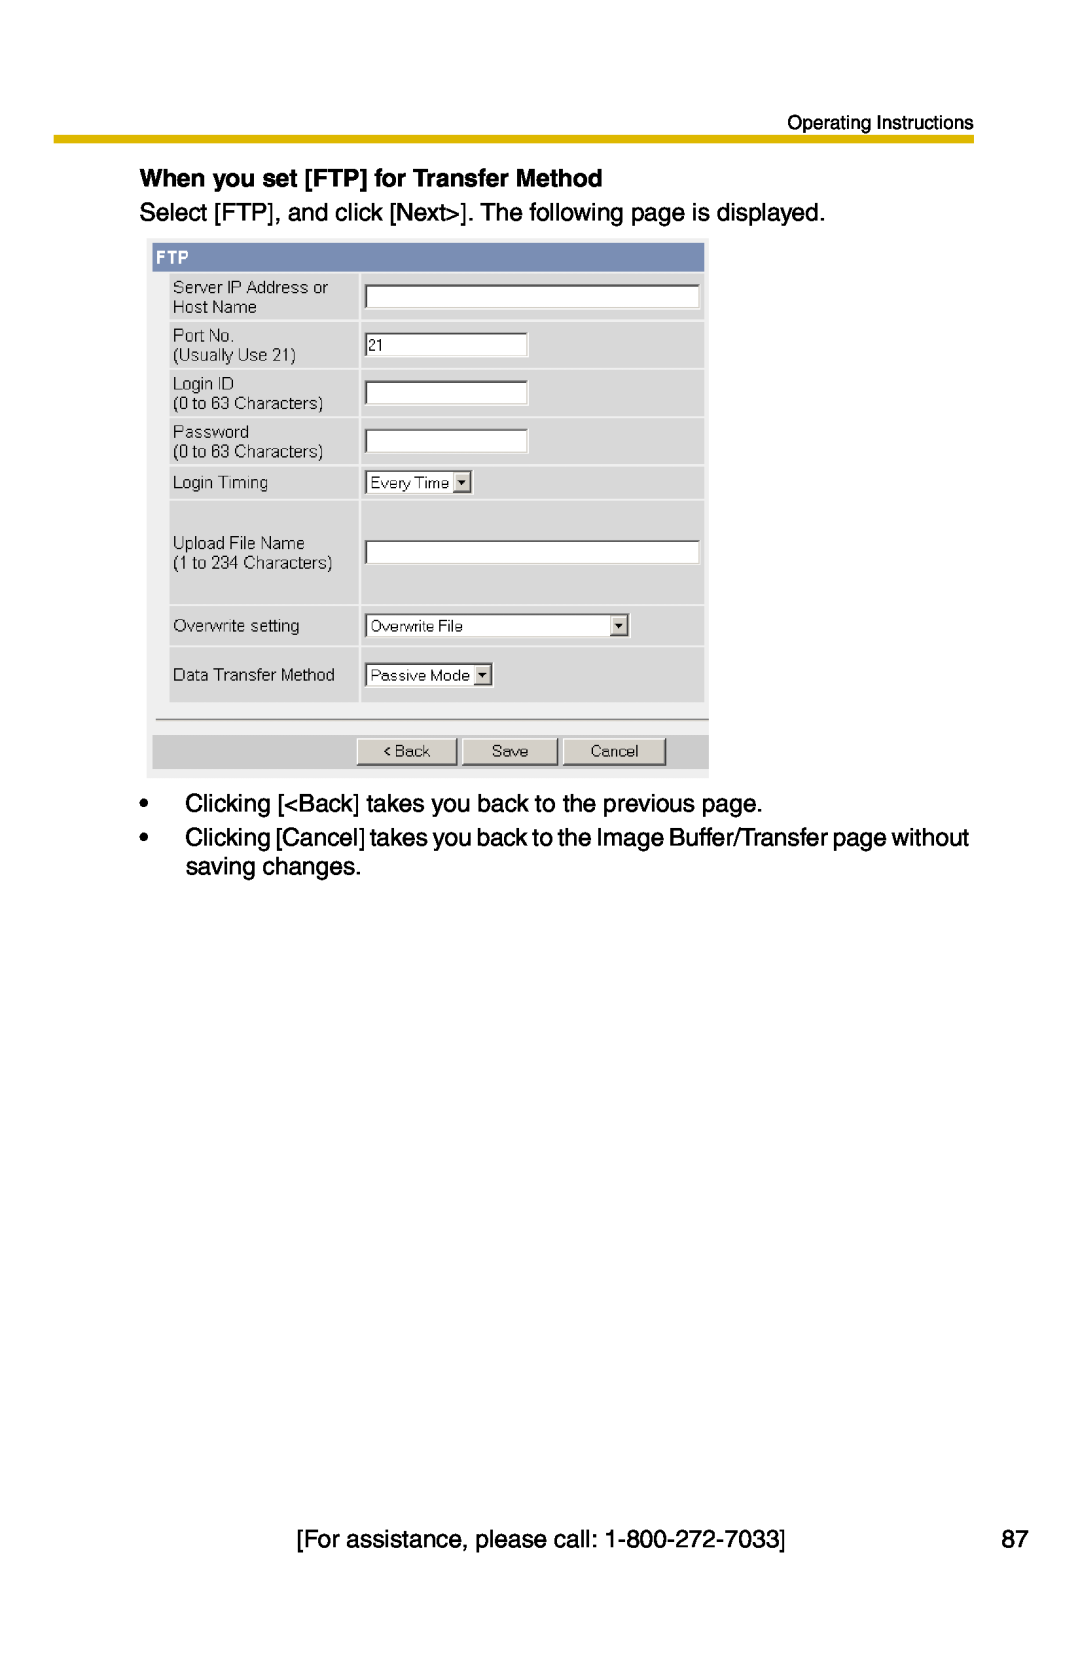 Panasonic BB-HCM331A When you set FTP for Transfer Method, Select FTP, and click Next. The following page is displayed 